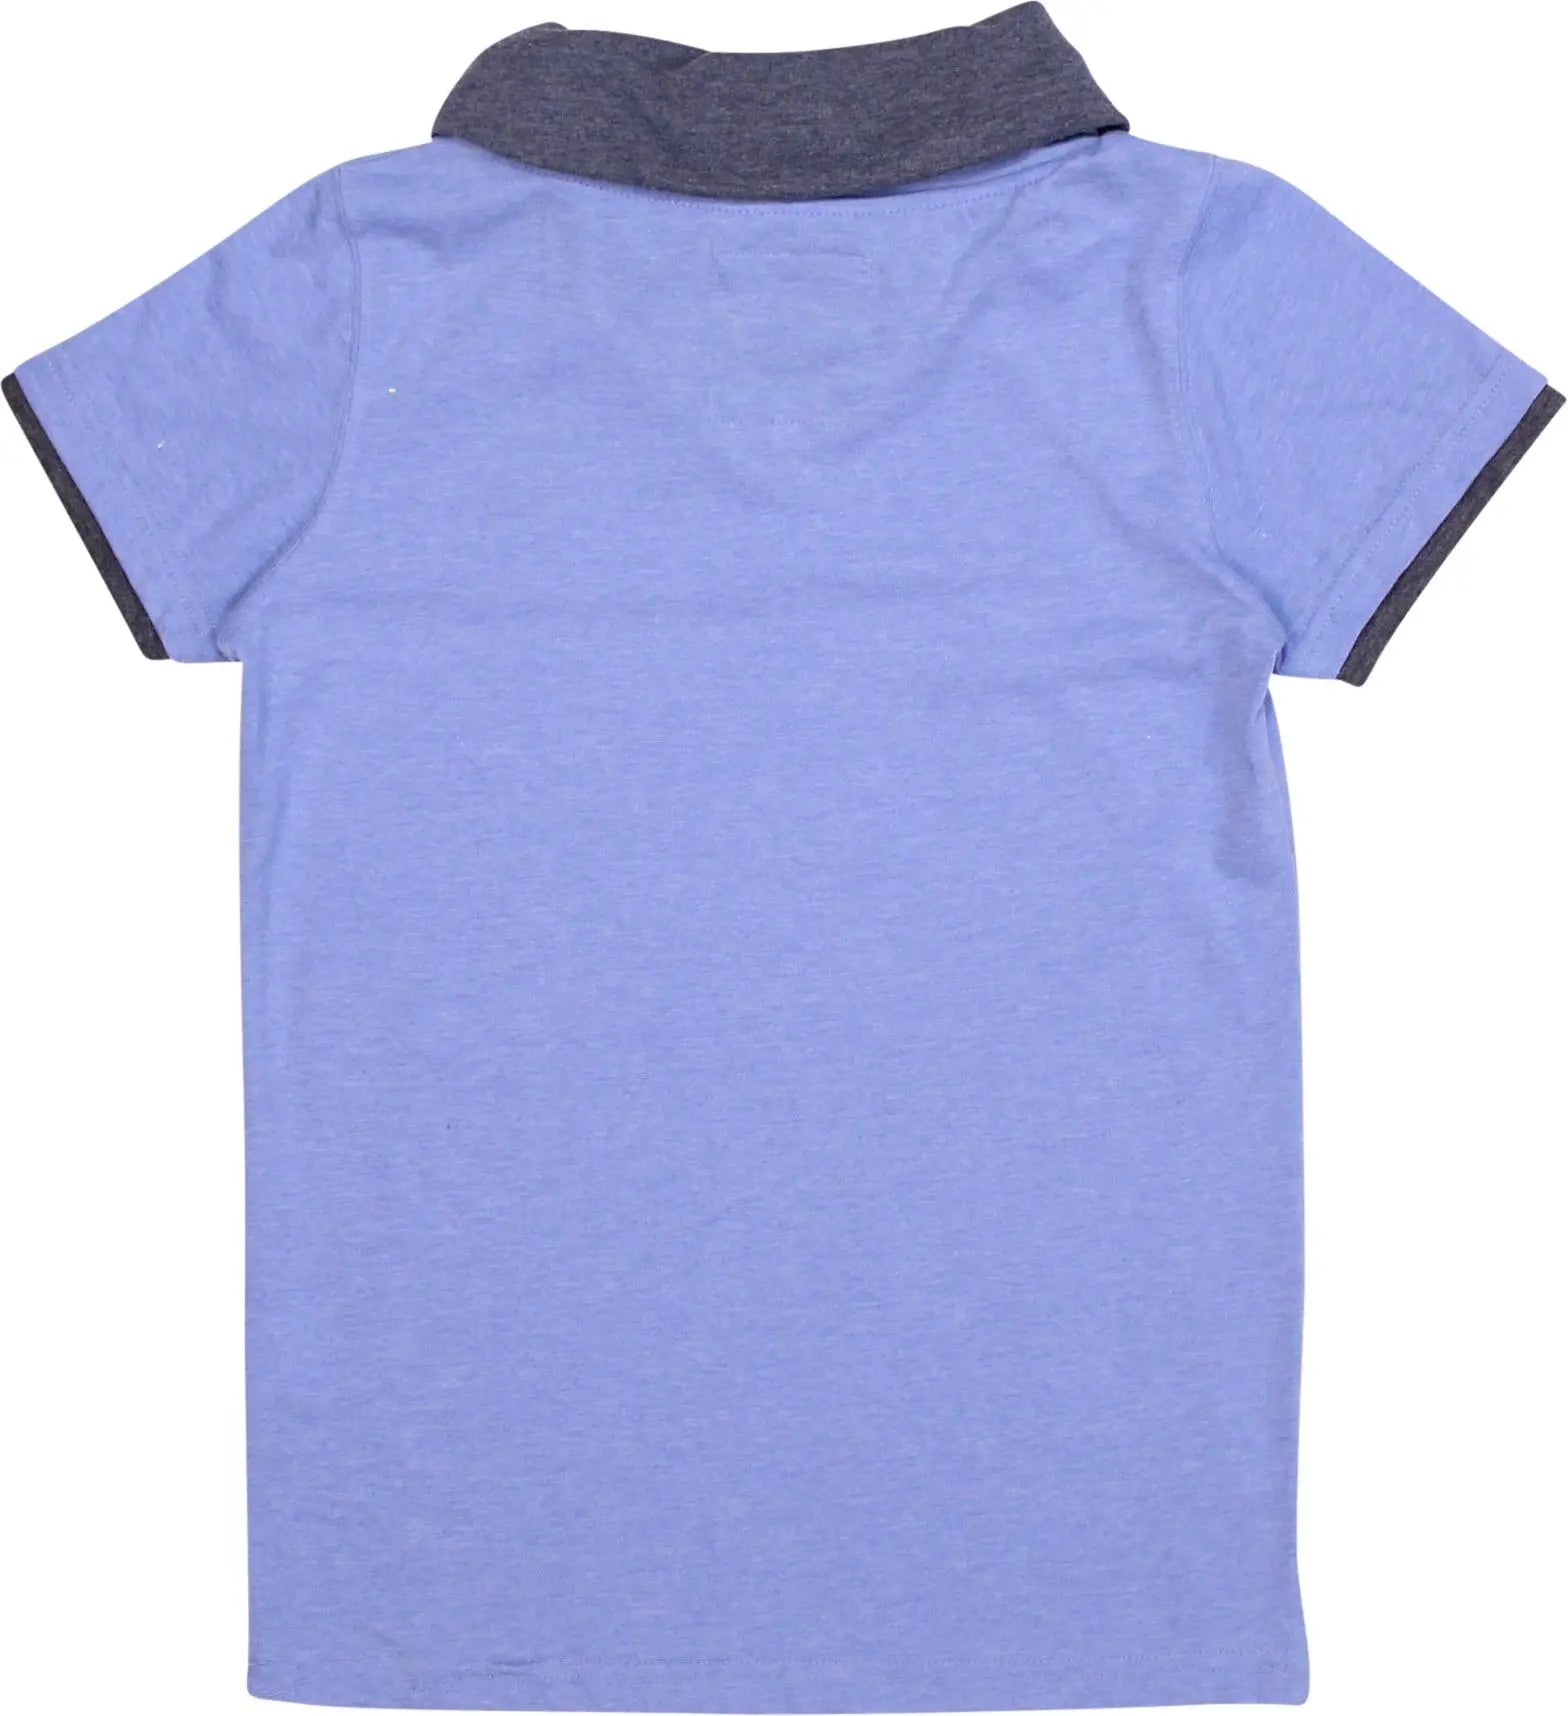 Europe Kids - Blue T-shirt- ThriftTale.com - Vintage and second handclothing